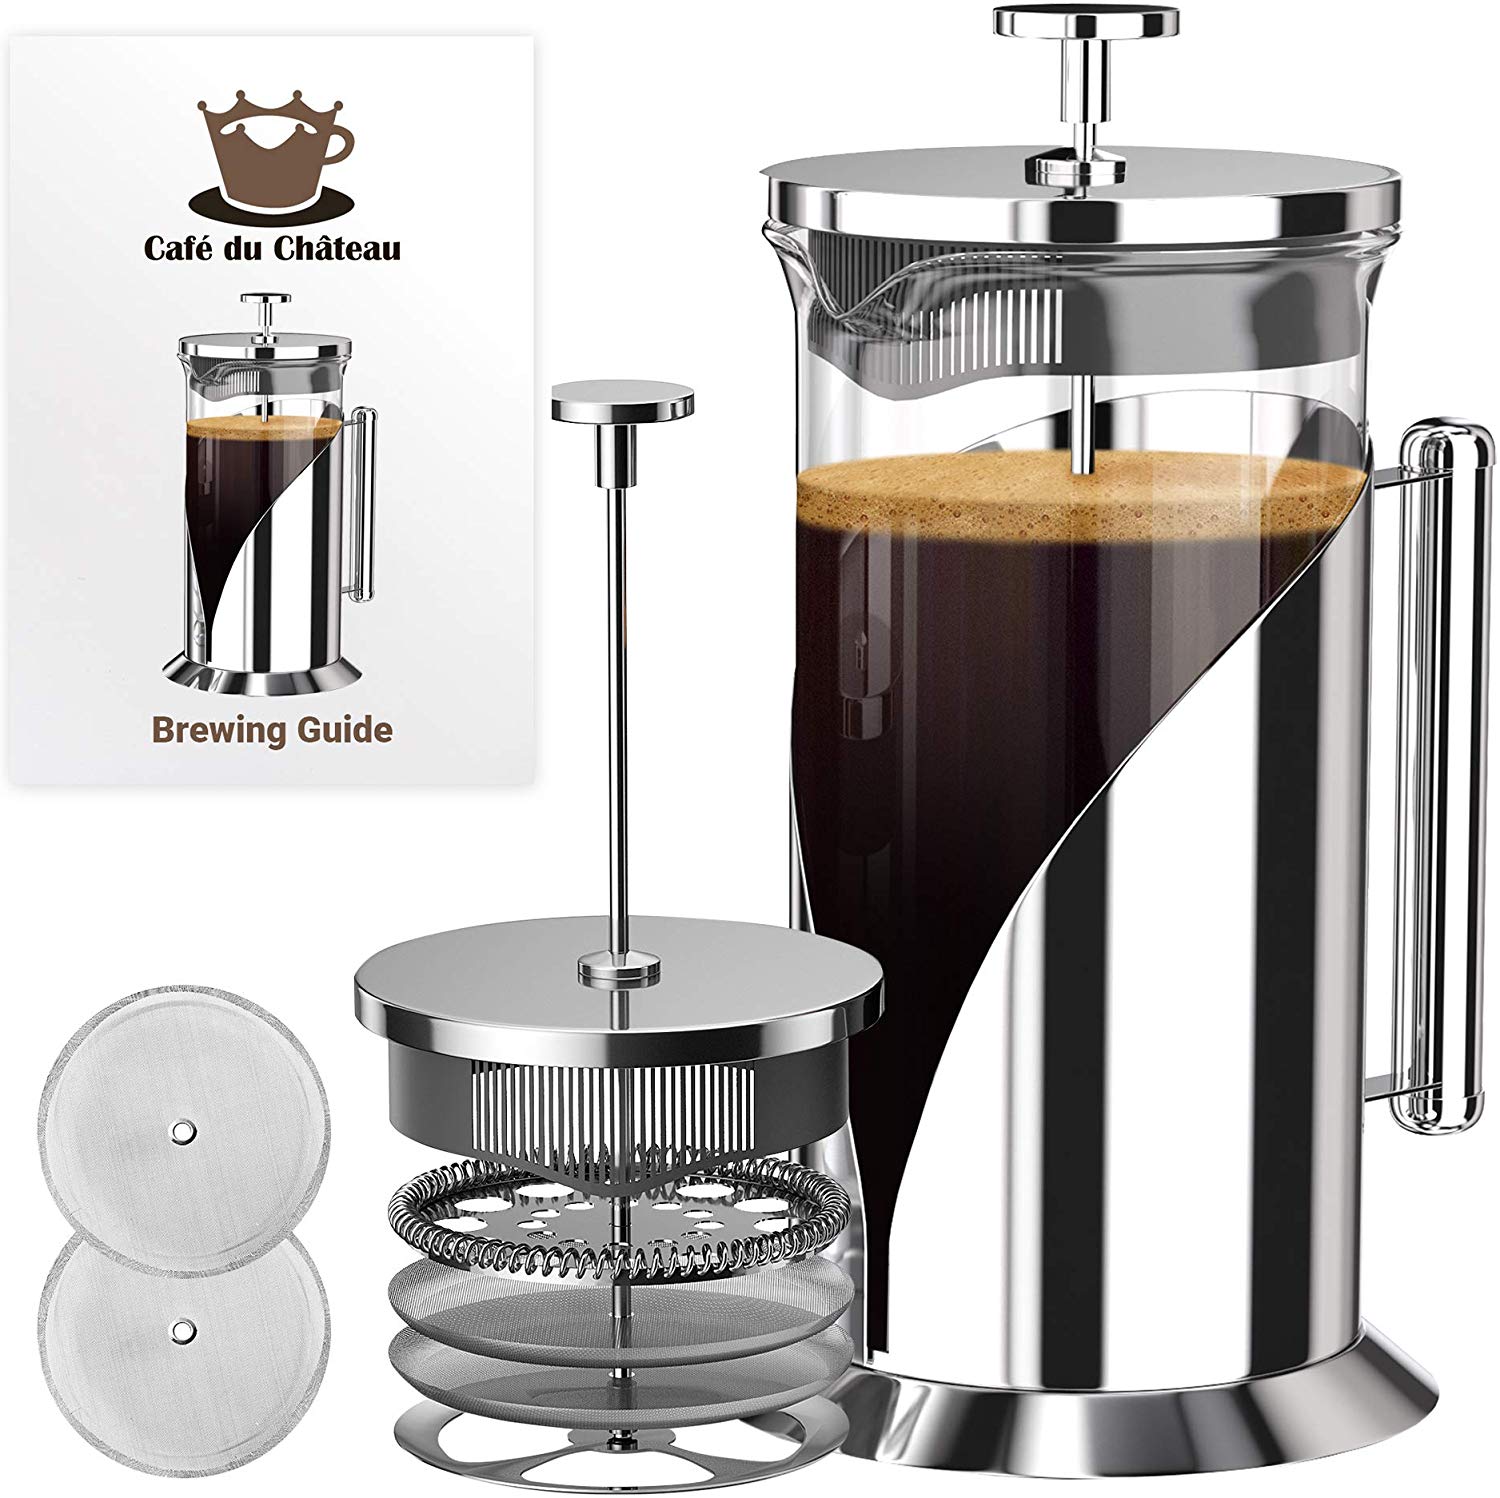 https://www.dontwasteyourmoney.com/wp-content/uploads/2019/11/cafe-du-chateau-french-press-coffee-maker-cold-brew-coffee-maker.jpg